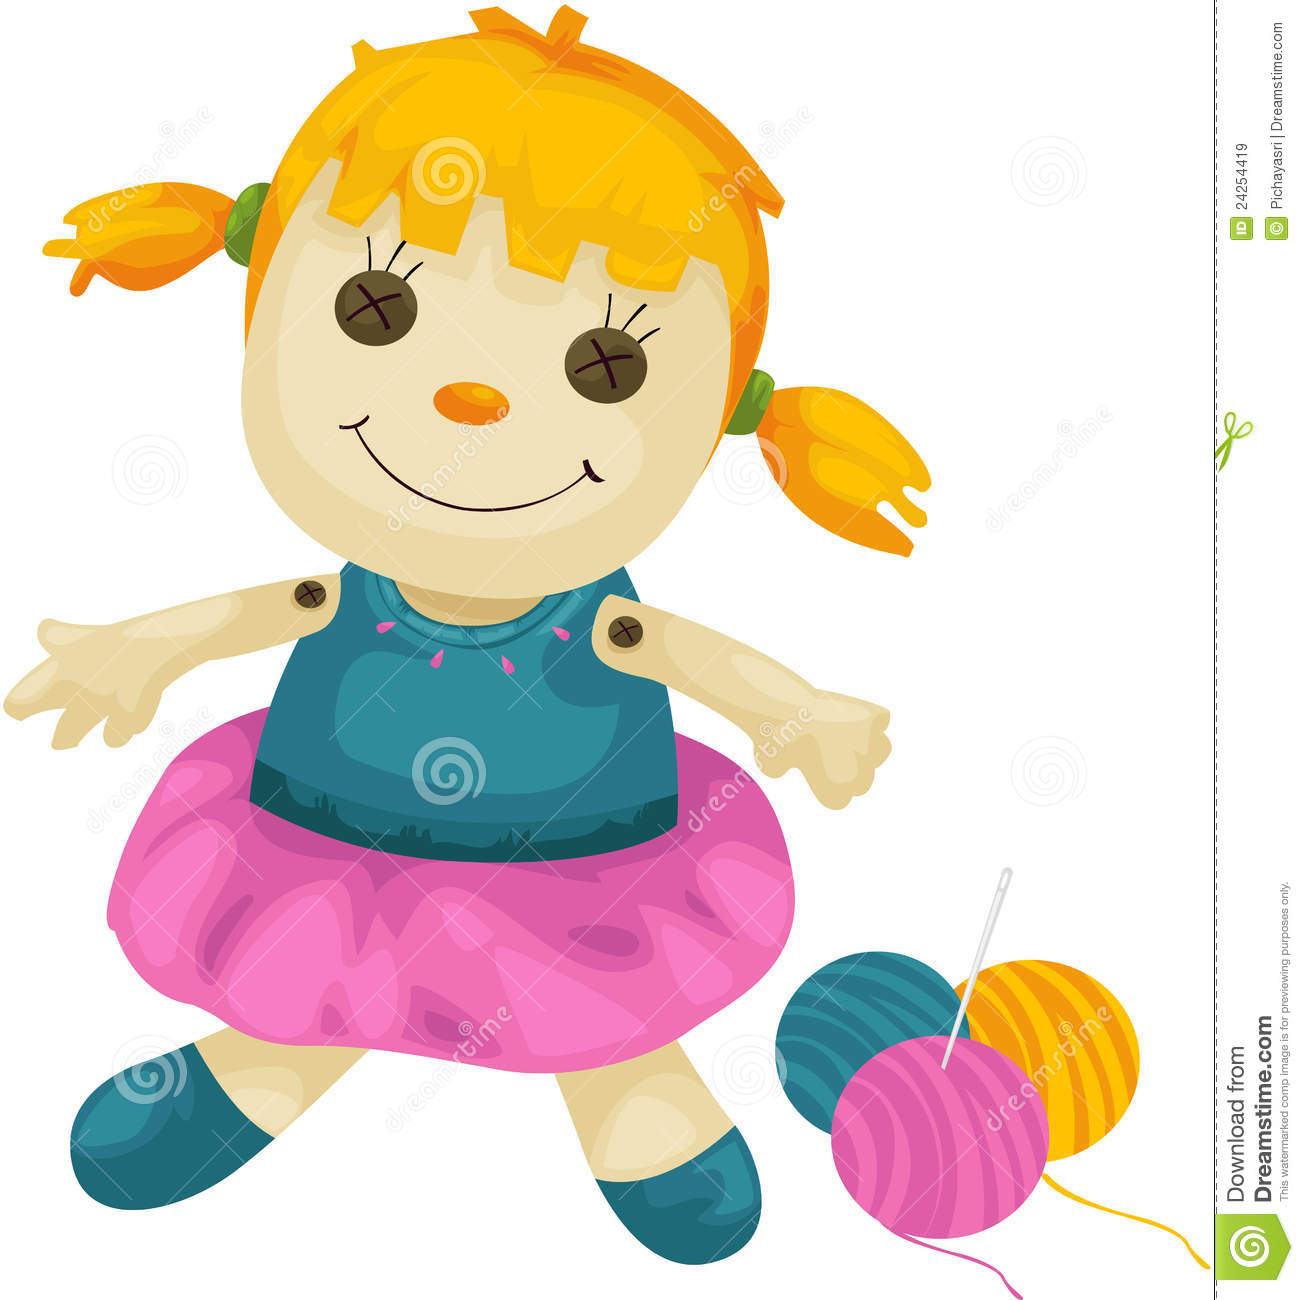 clipart of doll - photo #21